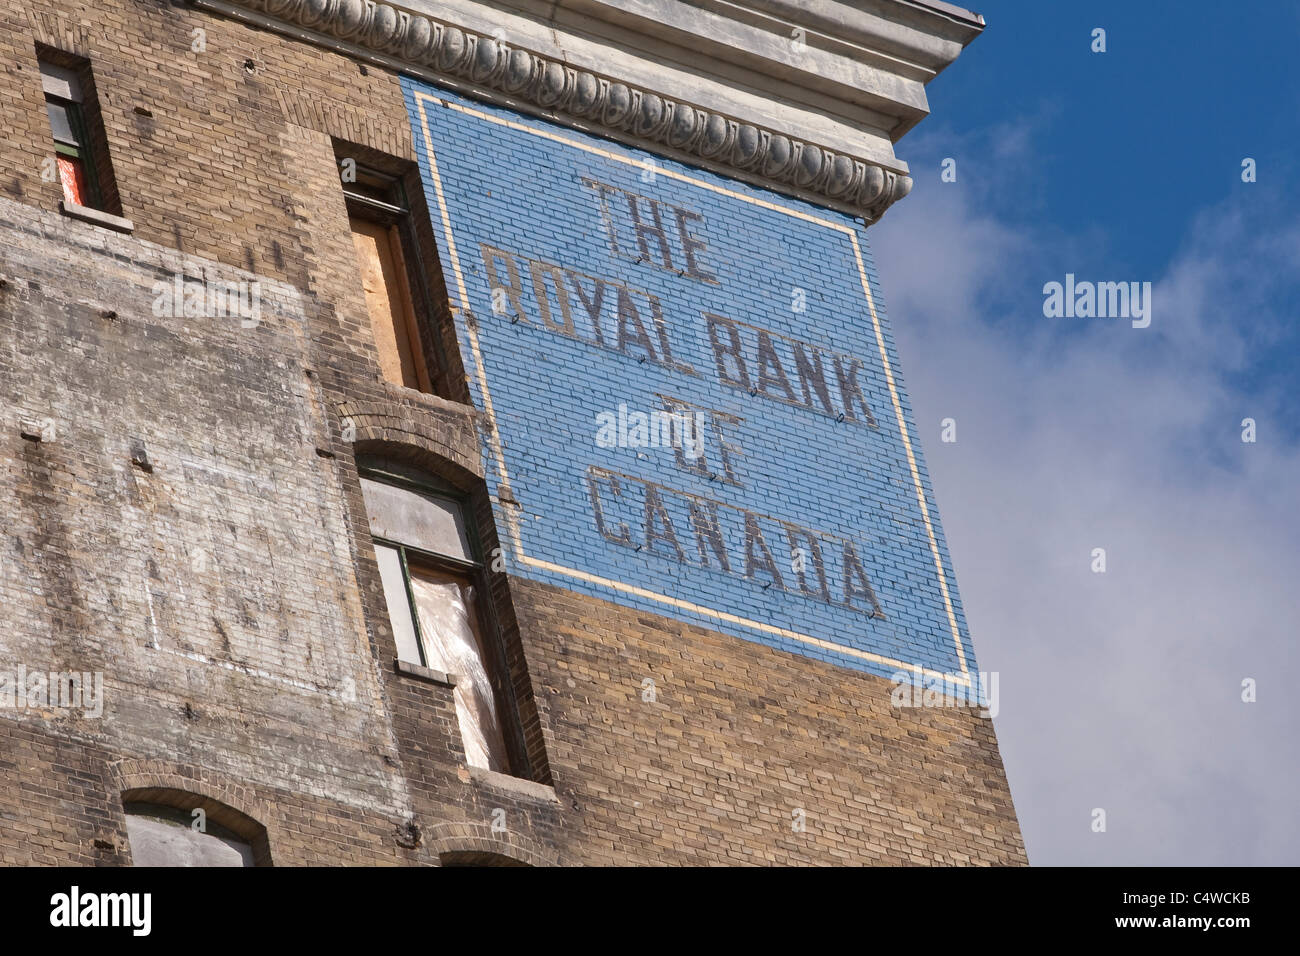 A Royal Bank of Canada vintage Mural advertisement is pictured in Winnipeg Sunday May 22, 2011. Stock Photo